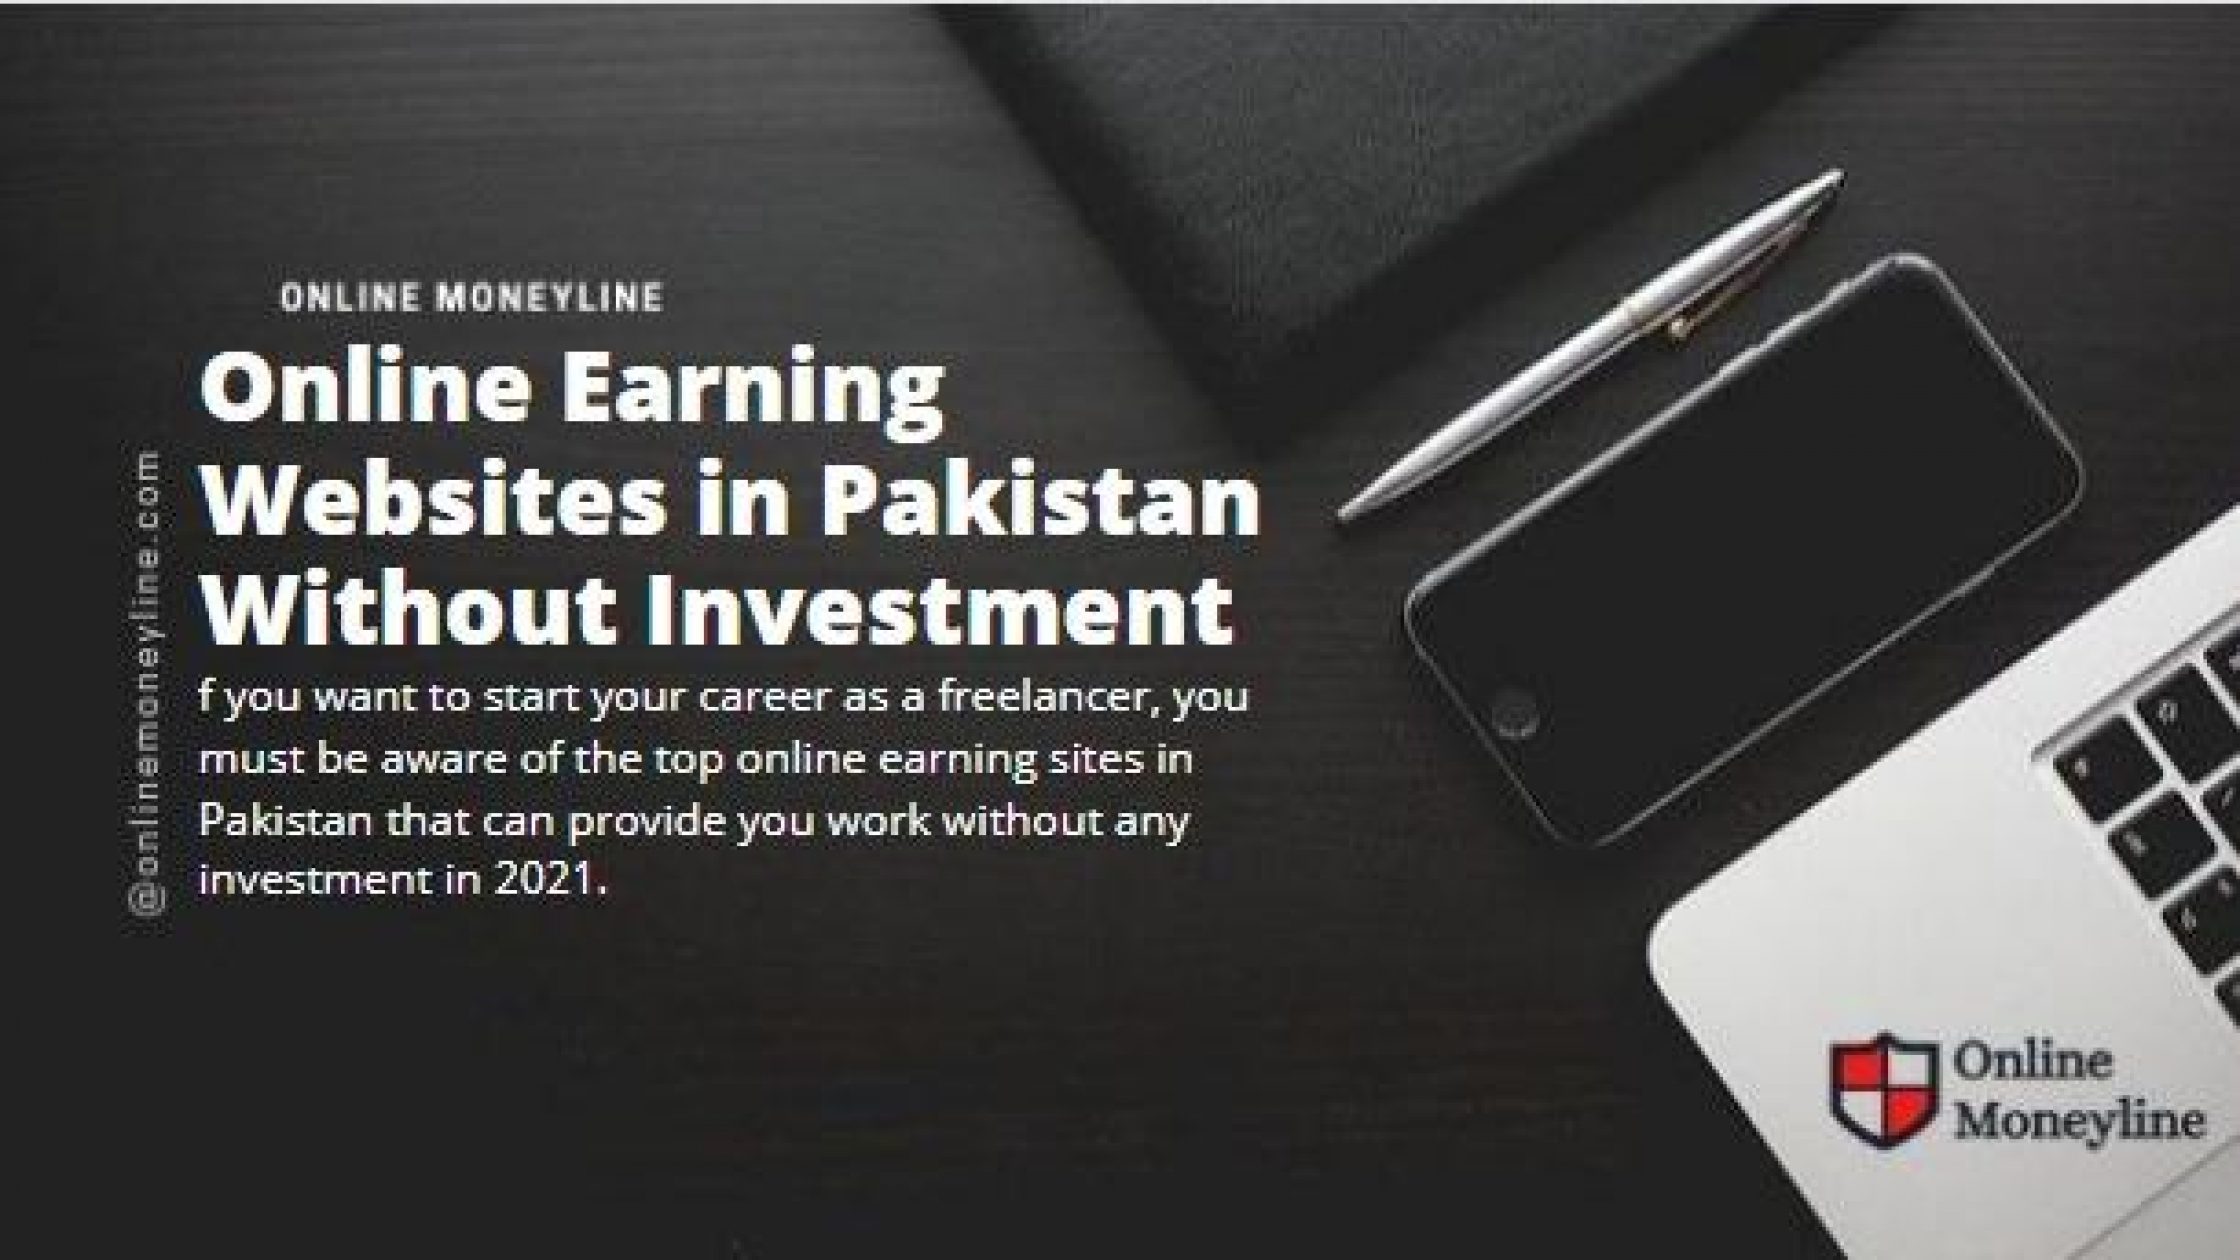 Online Earning Websites in Pakistan Without Investment